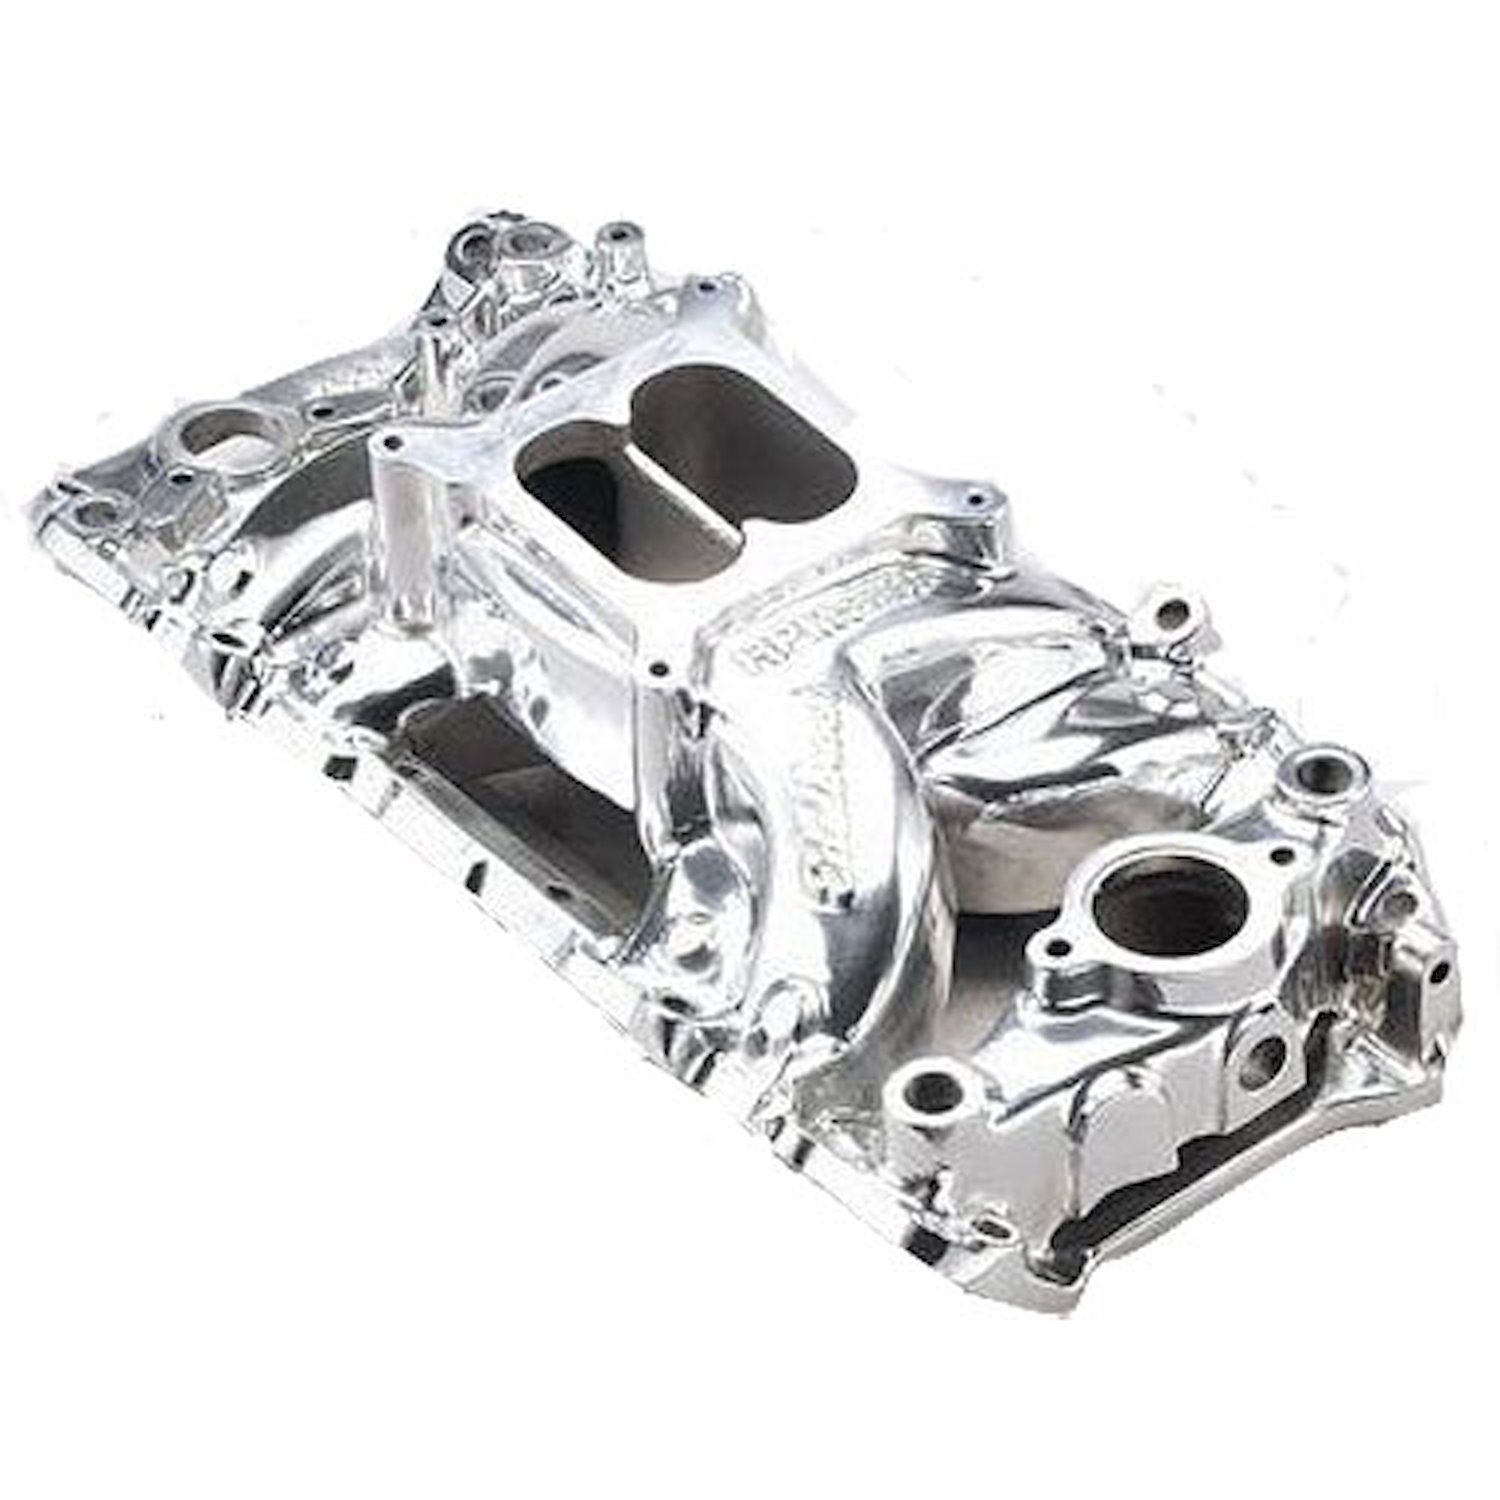 RPM Air-Gap 2-O Intake Manifold BB-Chevy 396-502 with oval port cylinder heads